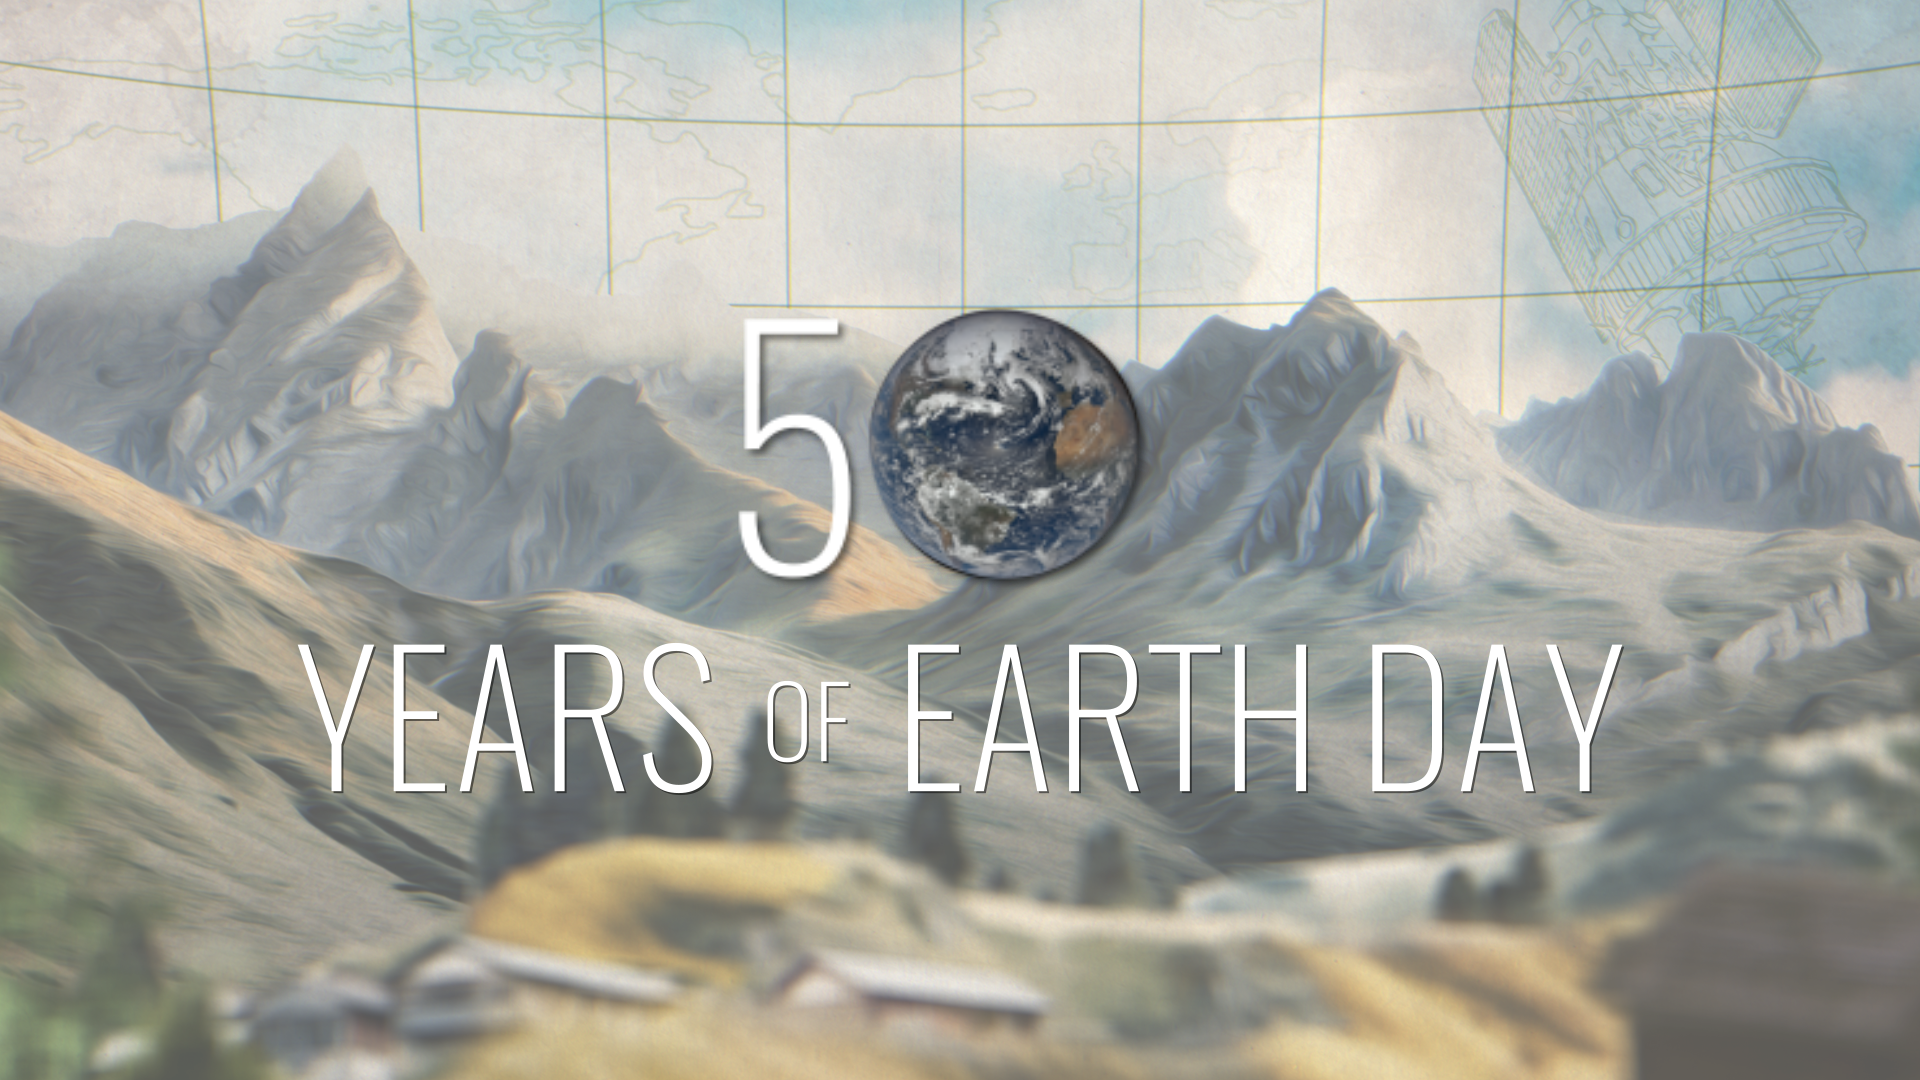 Preview Image for NASA Looks Back at 50 Years of Earth Day